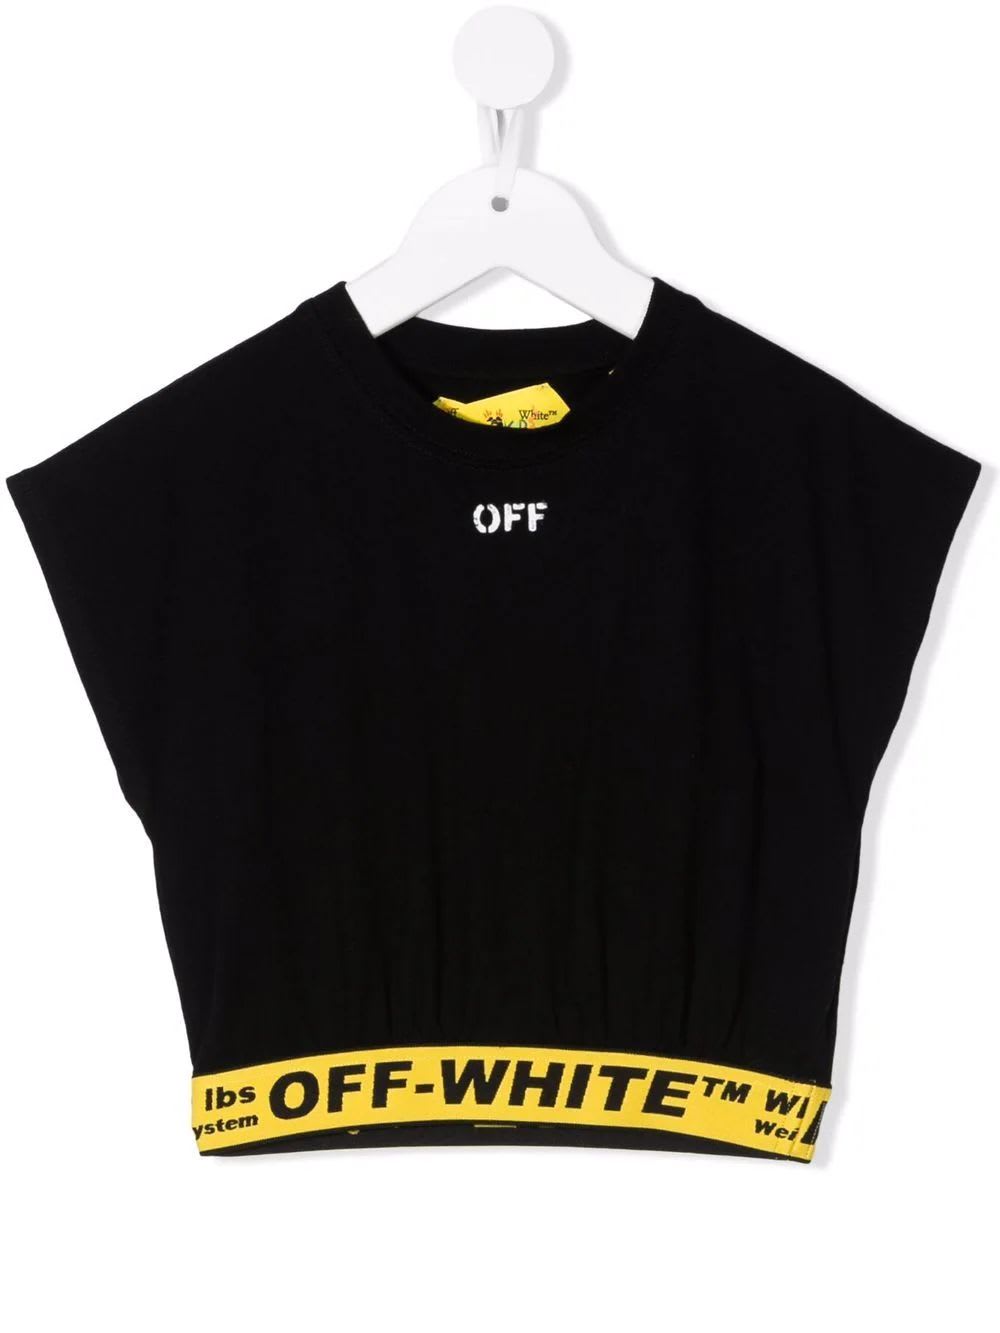 Off-White Kids Black And Yellow Off Industrial Crop Tee Top